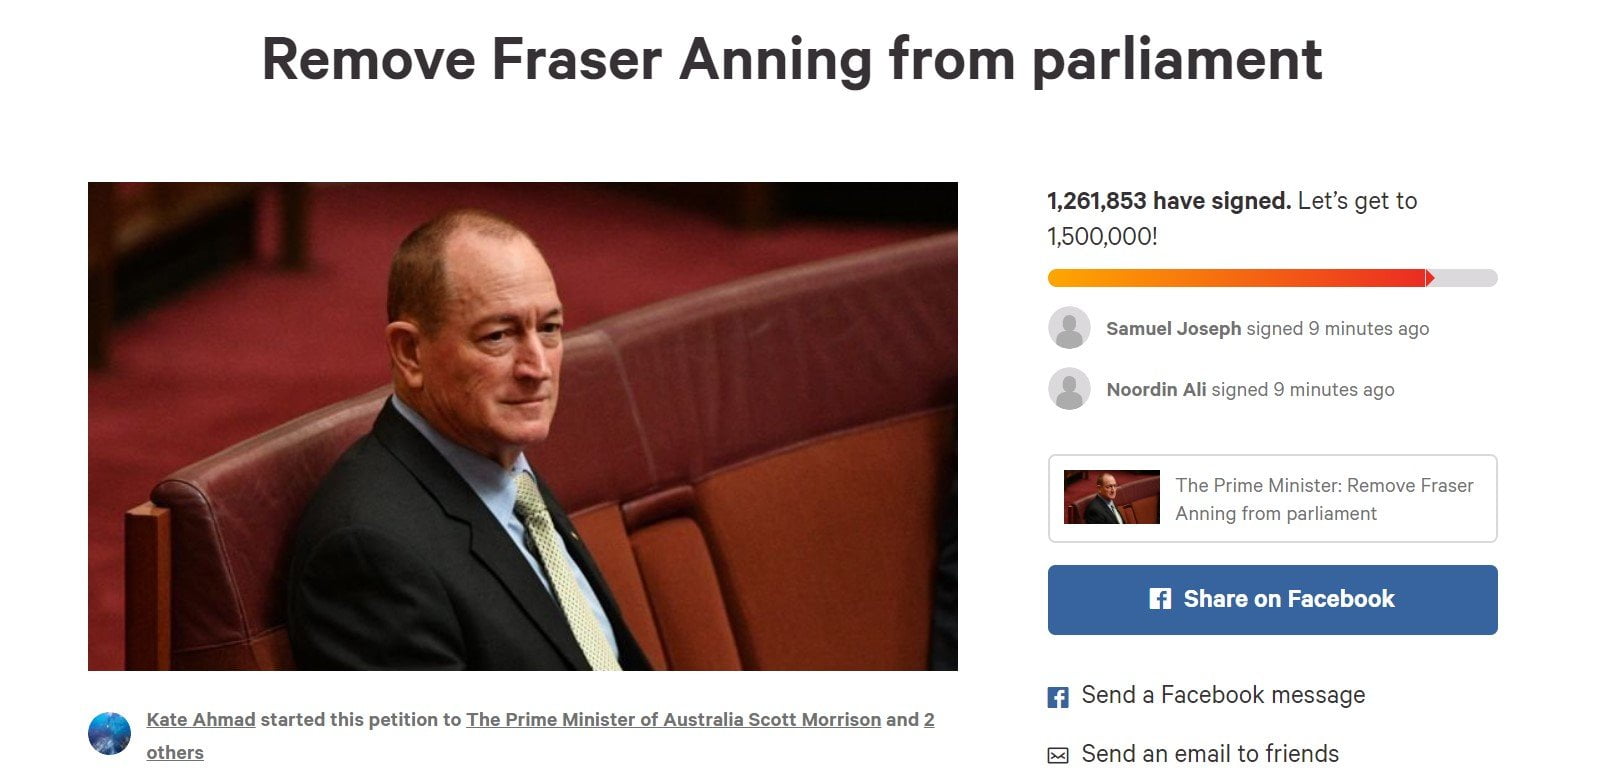 Over 1 Million People Signed Petition To Remove Fraser Anning BBC